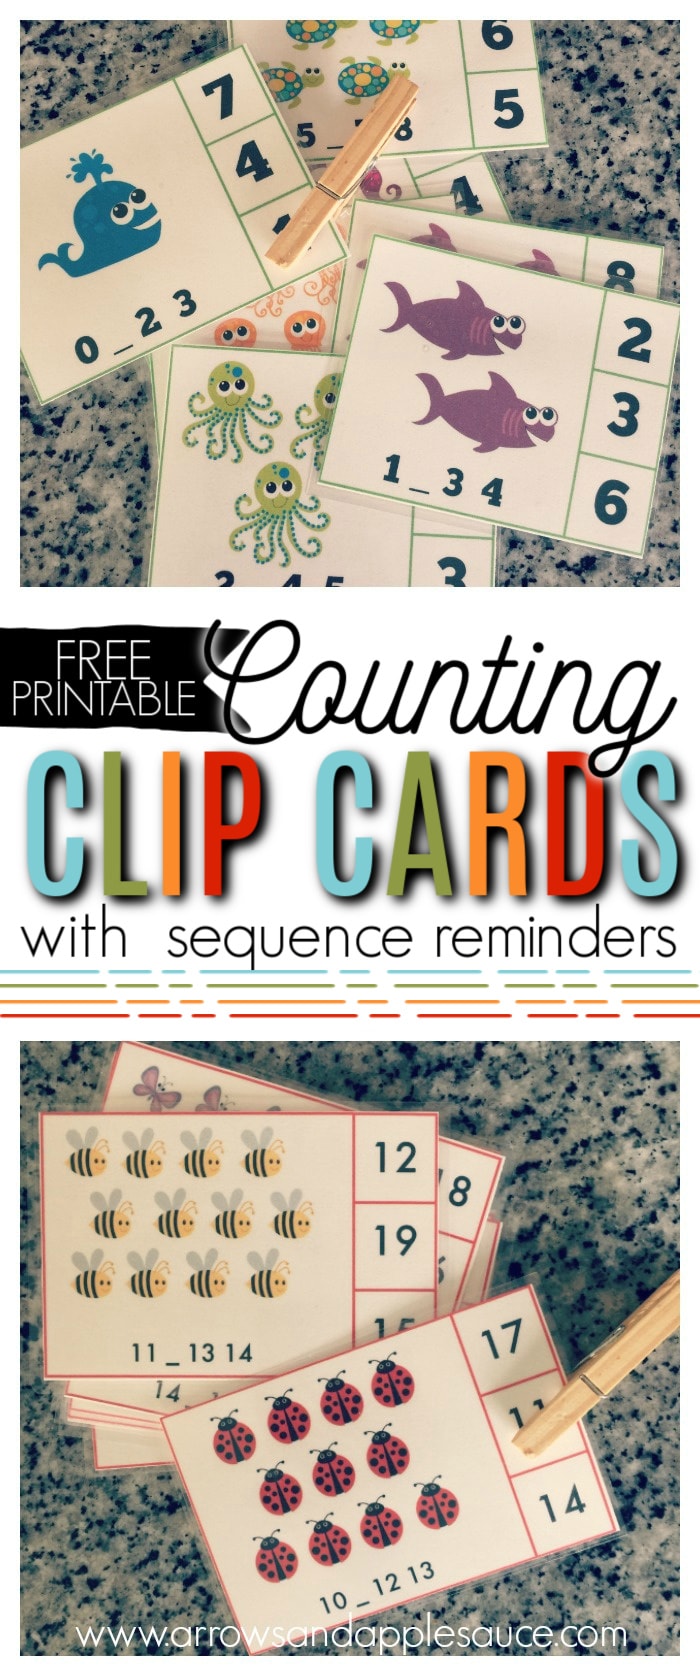 Free alphabet and counting clip card printables. Learning the alphabet and vowel sounds, and counting up to twenty is fun and easy with these cute clip card matching games. #alphabetactivities #preschoolprintables #learningtocount #clipcards #freeprintables #preschoolathome #preschoolmath #vowelsounds